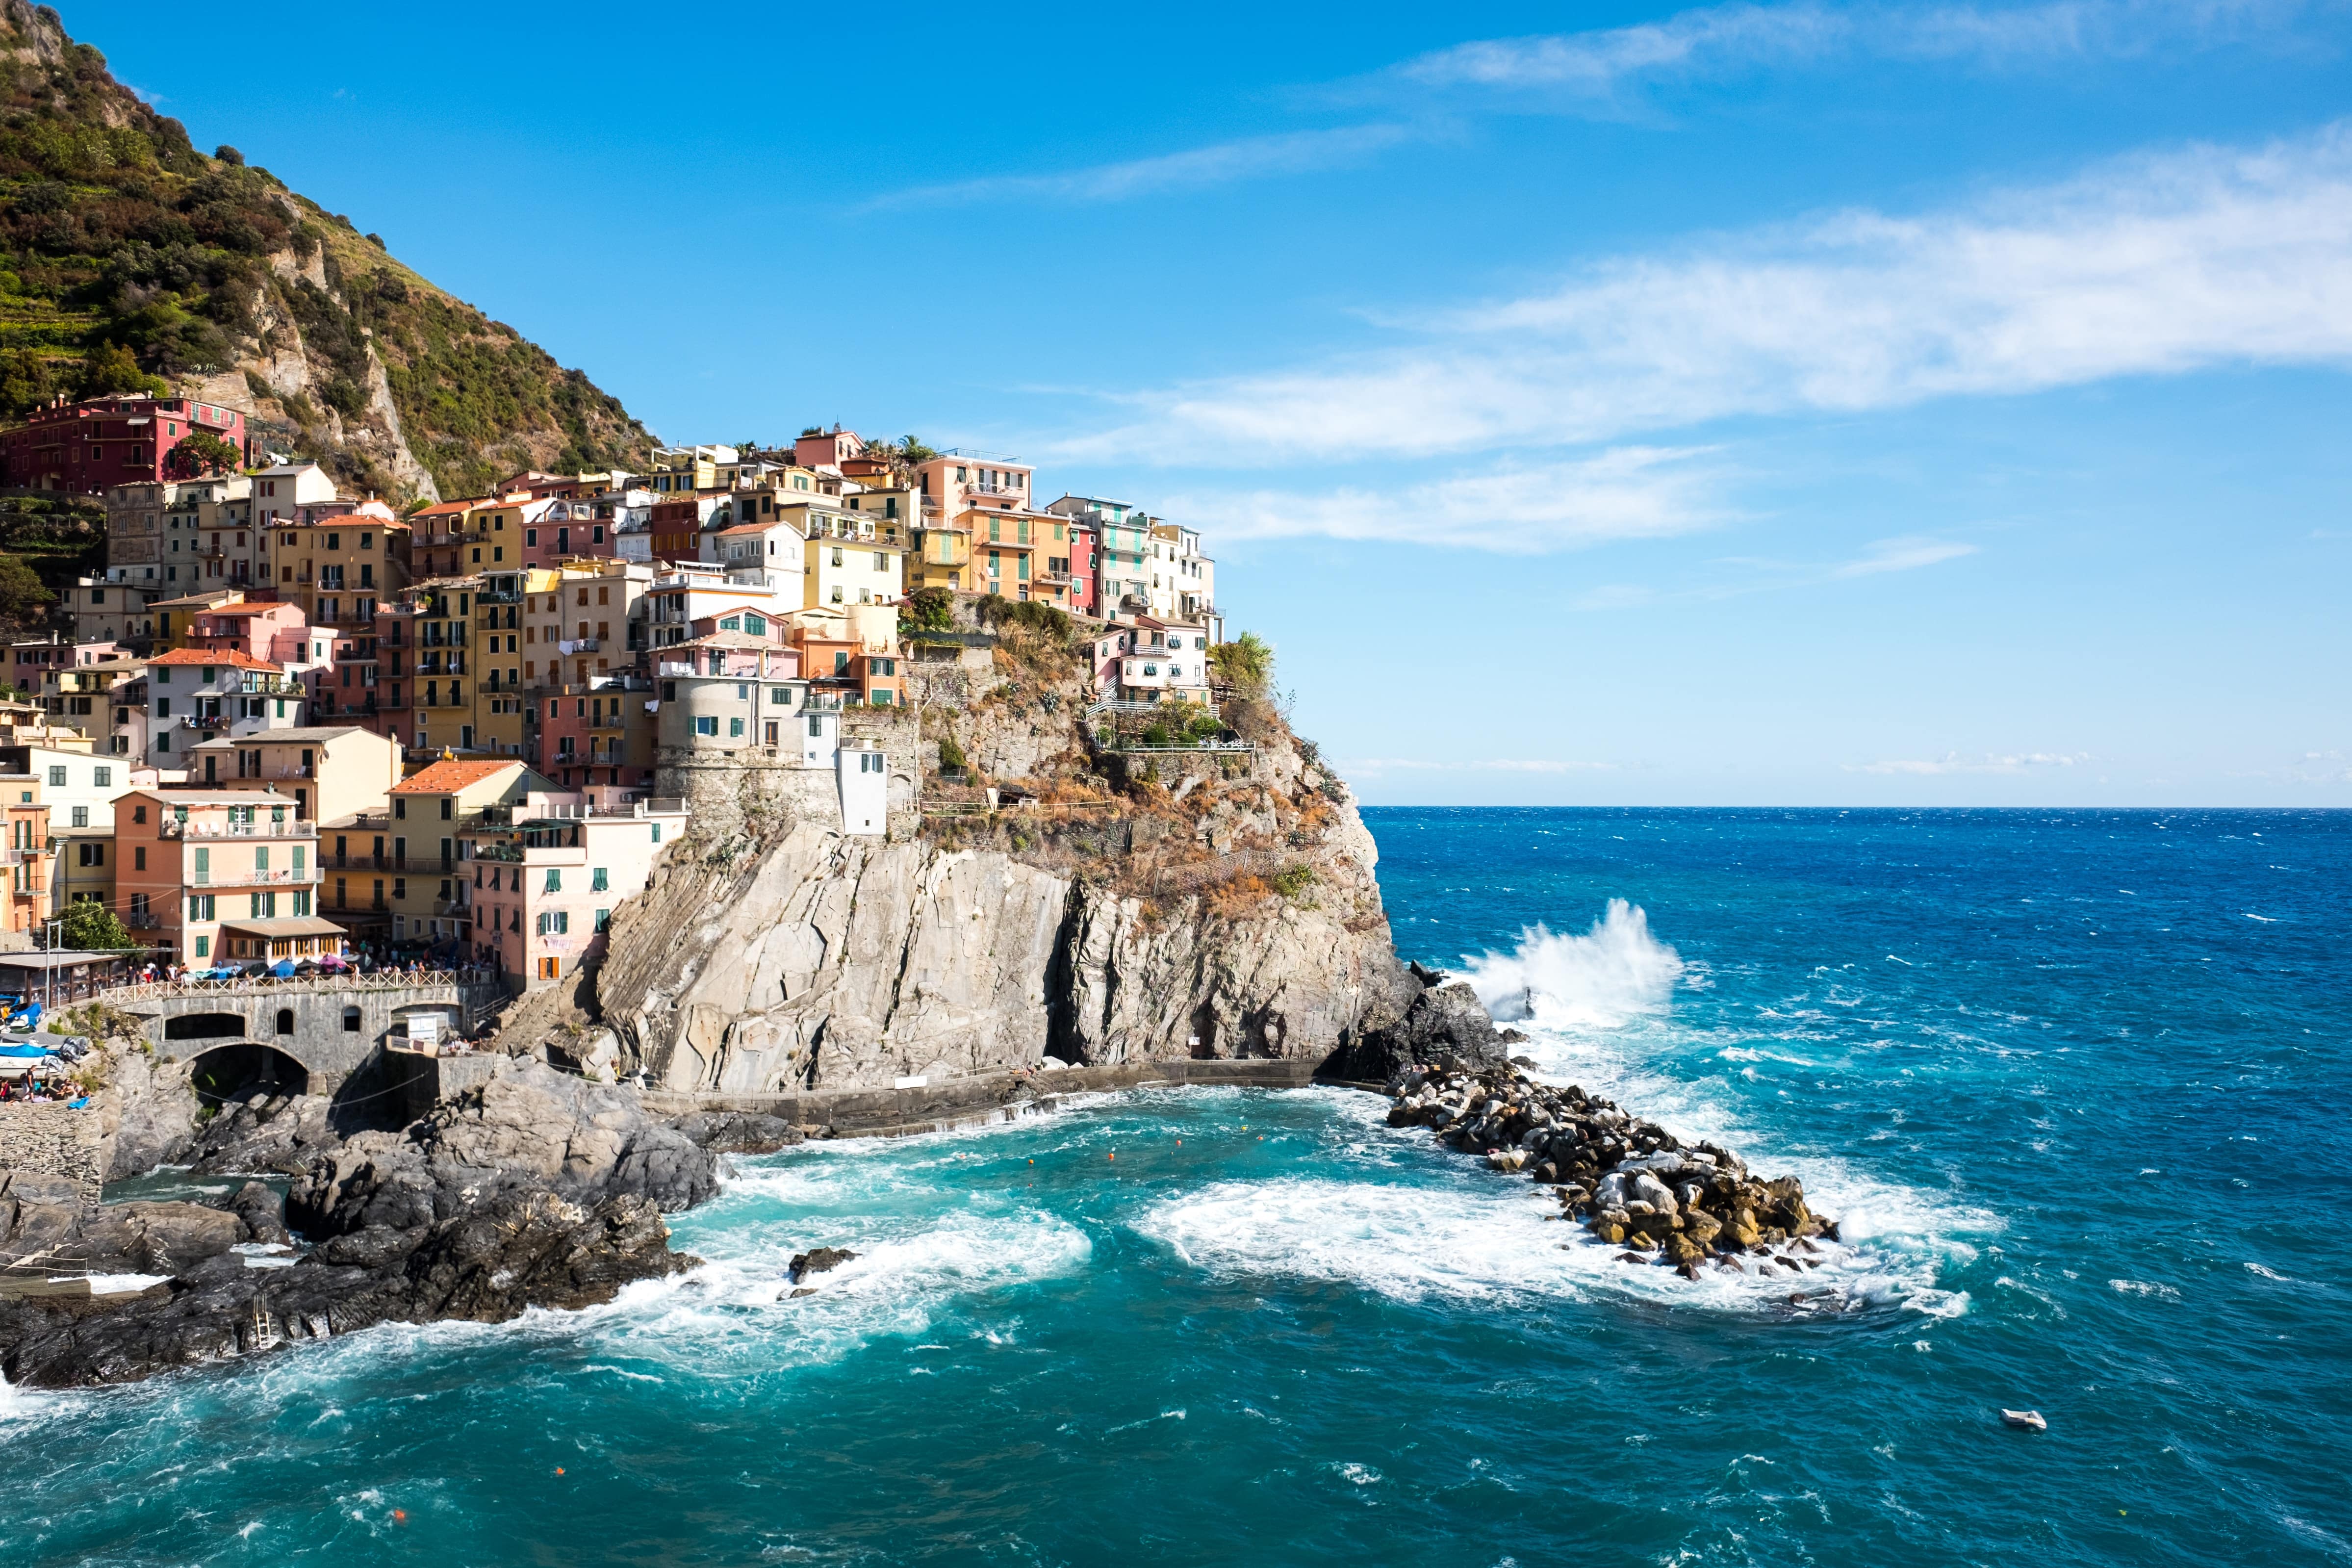 A picture of the famous viewpoint in front of “Manarola” hamlet on the south Liguria Coast called 5 Terre (5 Lands)